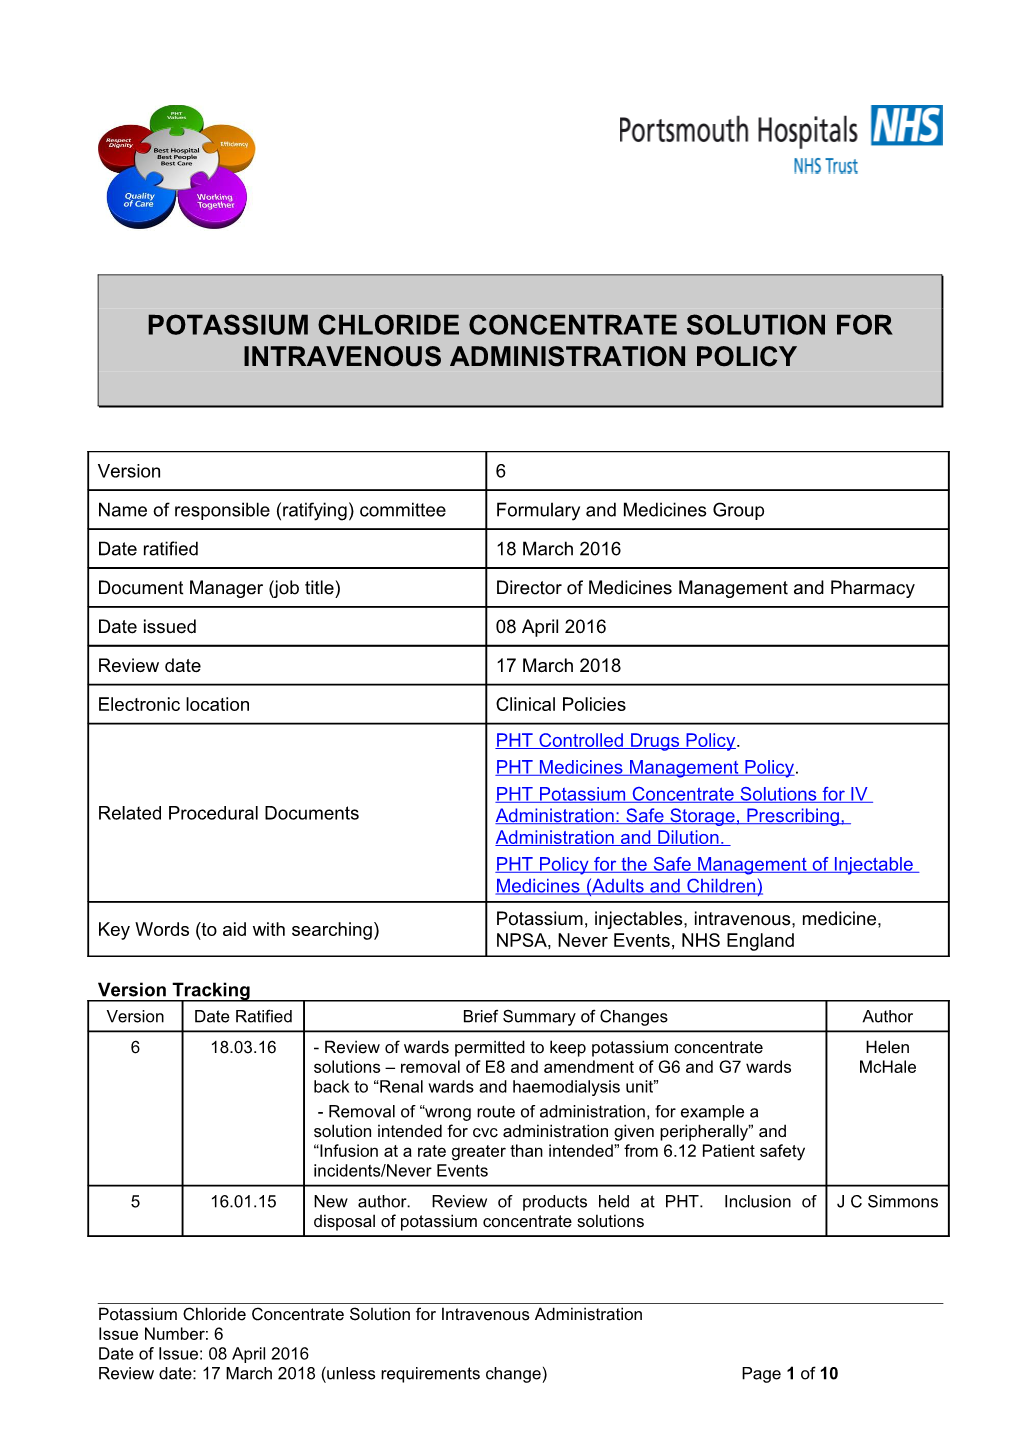 Potassium Chloride Concentrate Solution for Intravenous Administration Policy